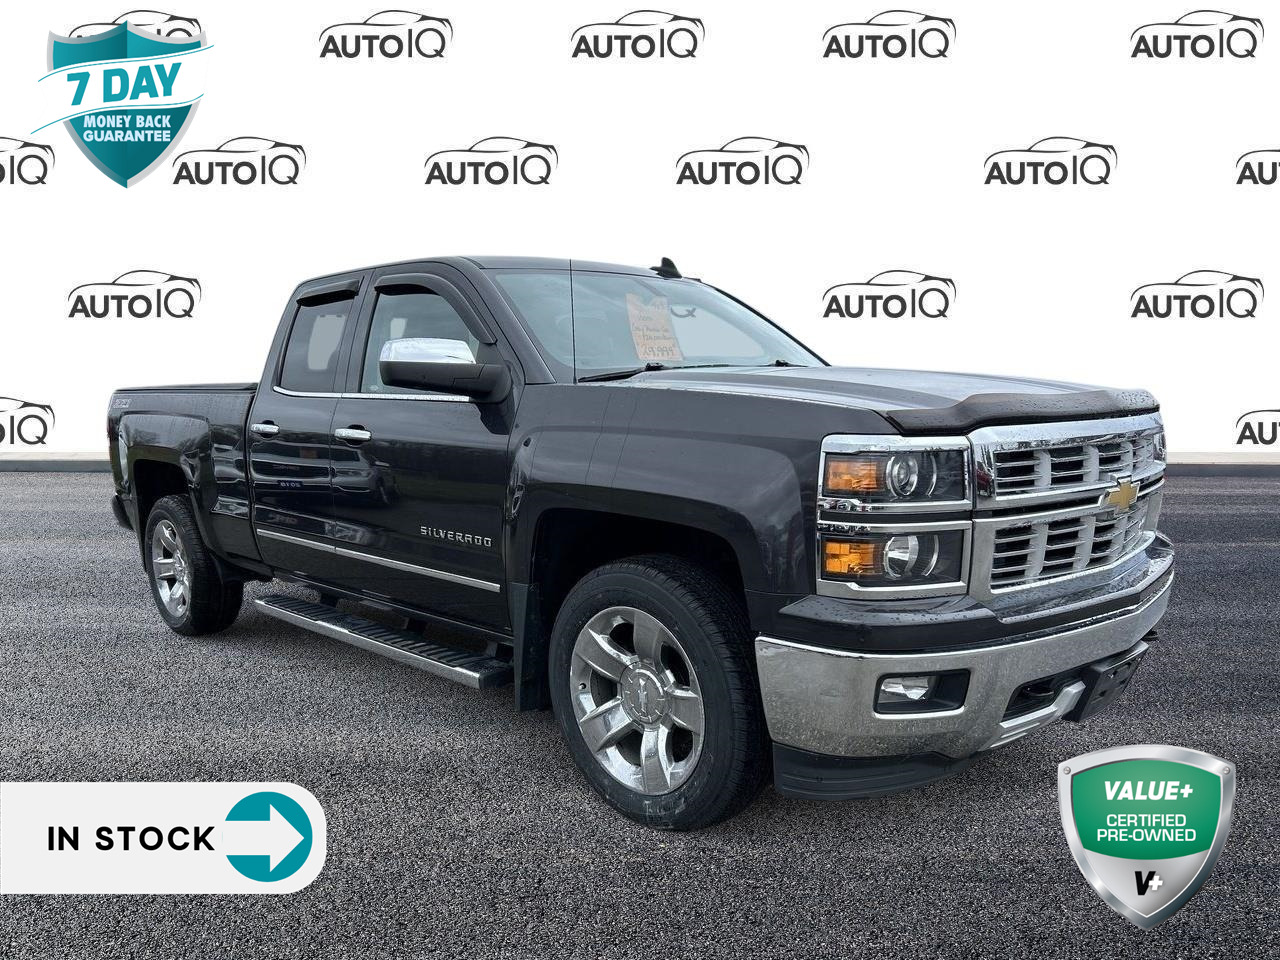 2015 Chevrolet Silverado 1500 2LZ BOUGHT AND SERVICED HERE | LOW KM'S | NO ACCID